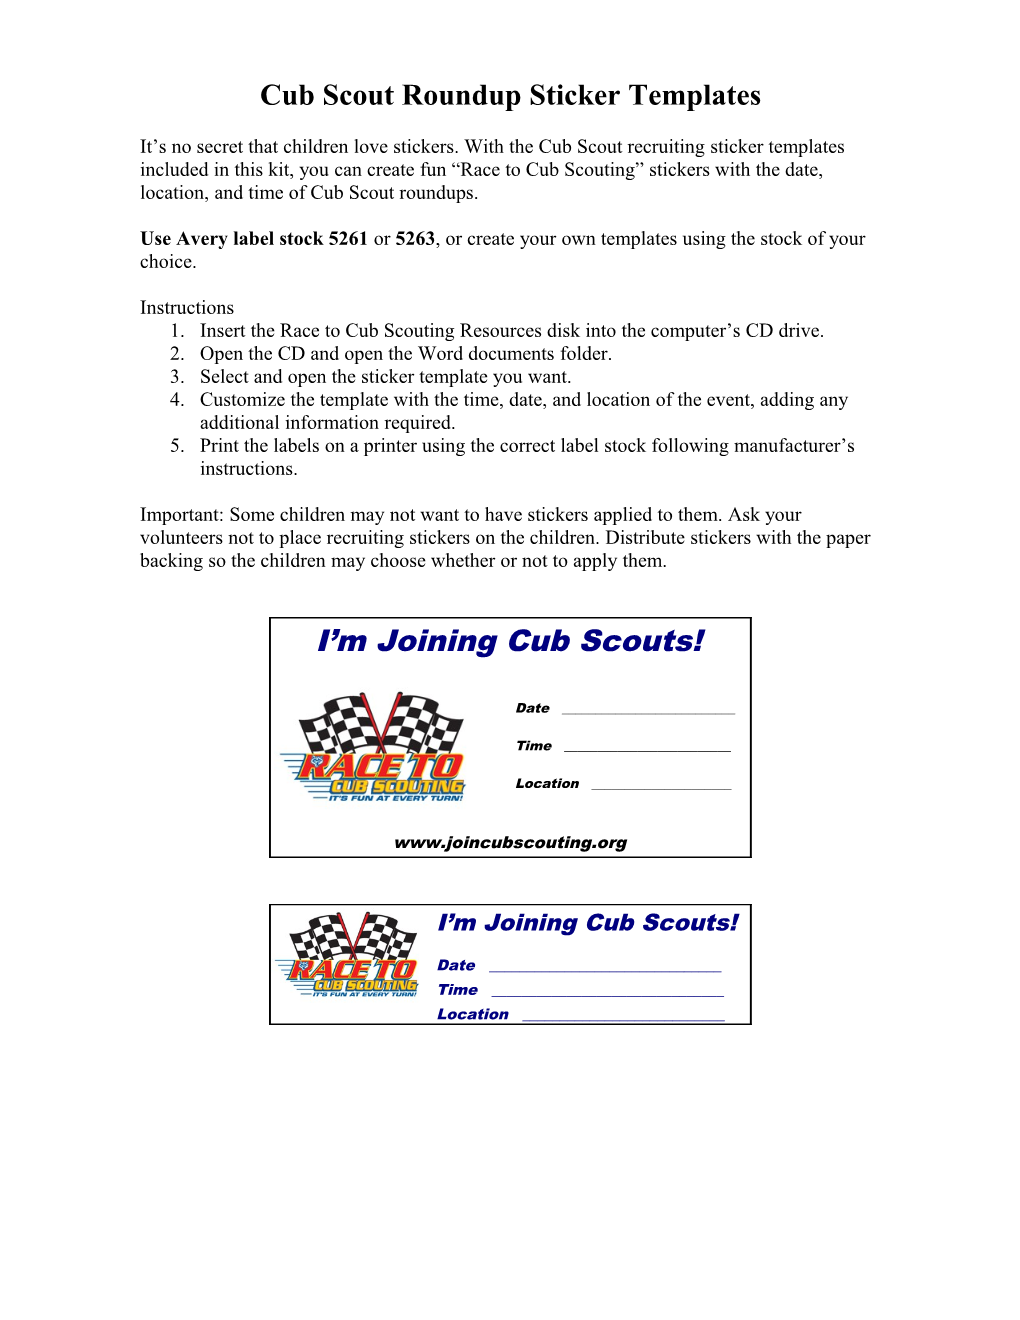 Cub Scout Round-Up Stickers